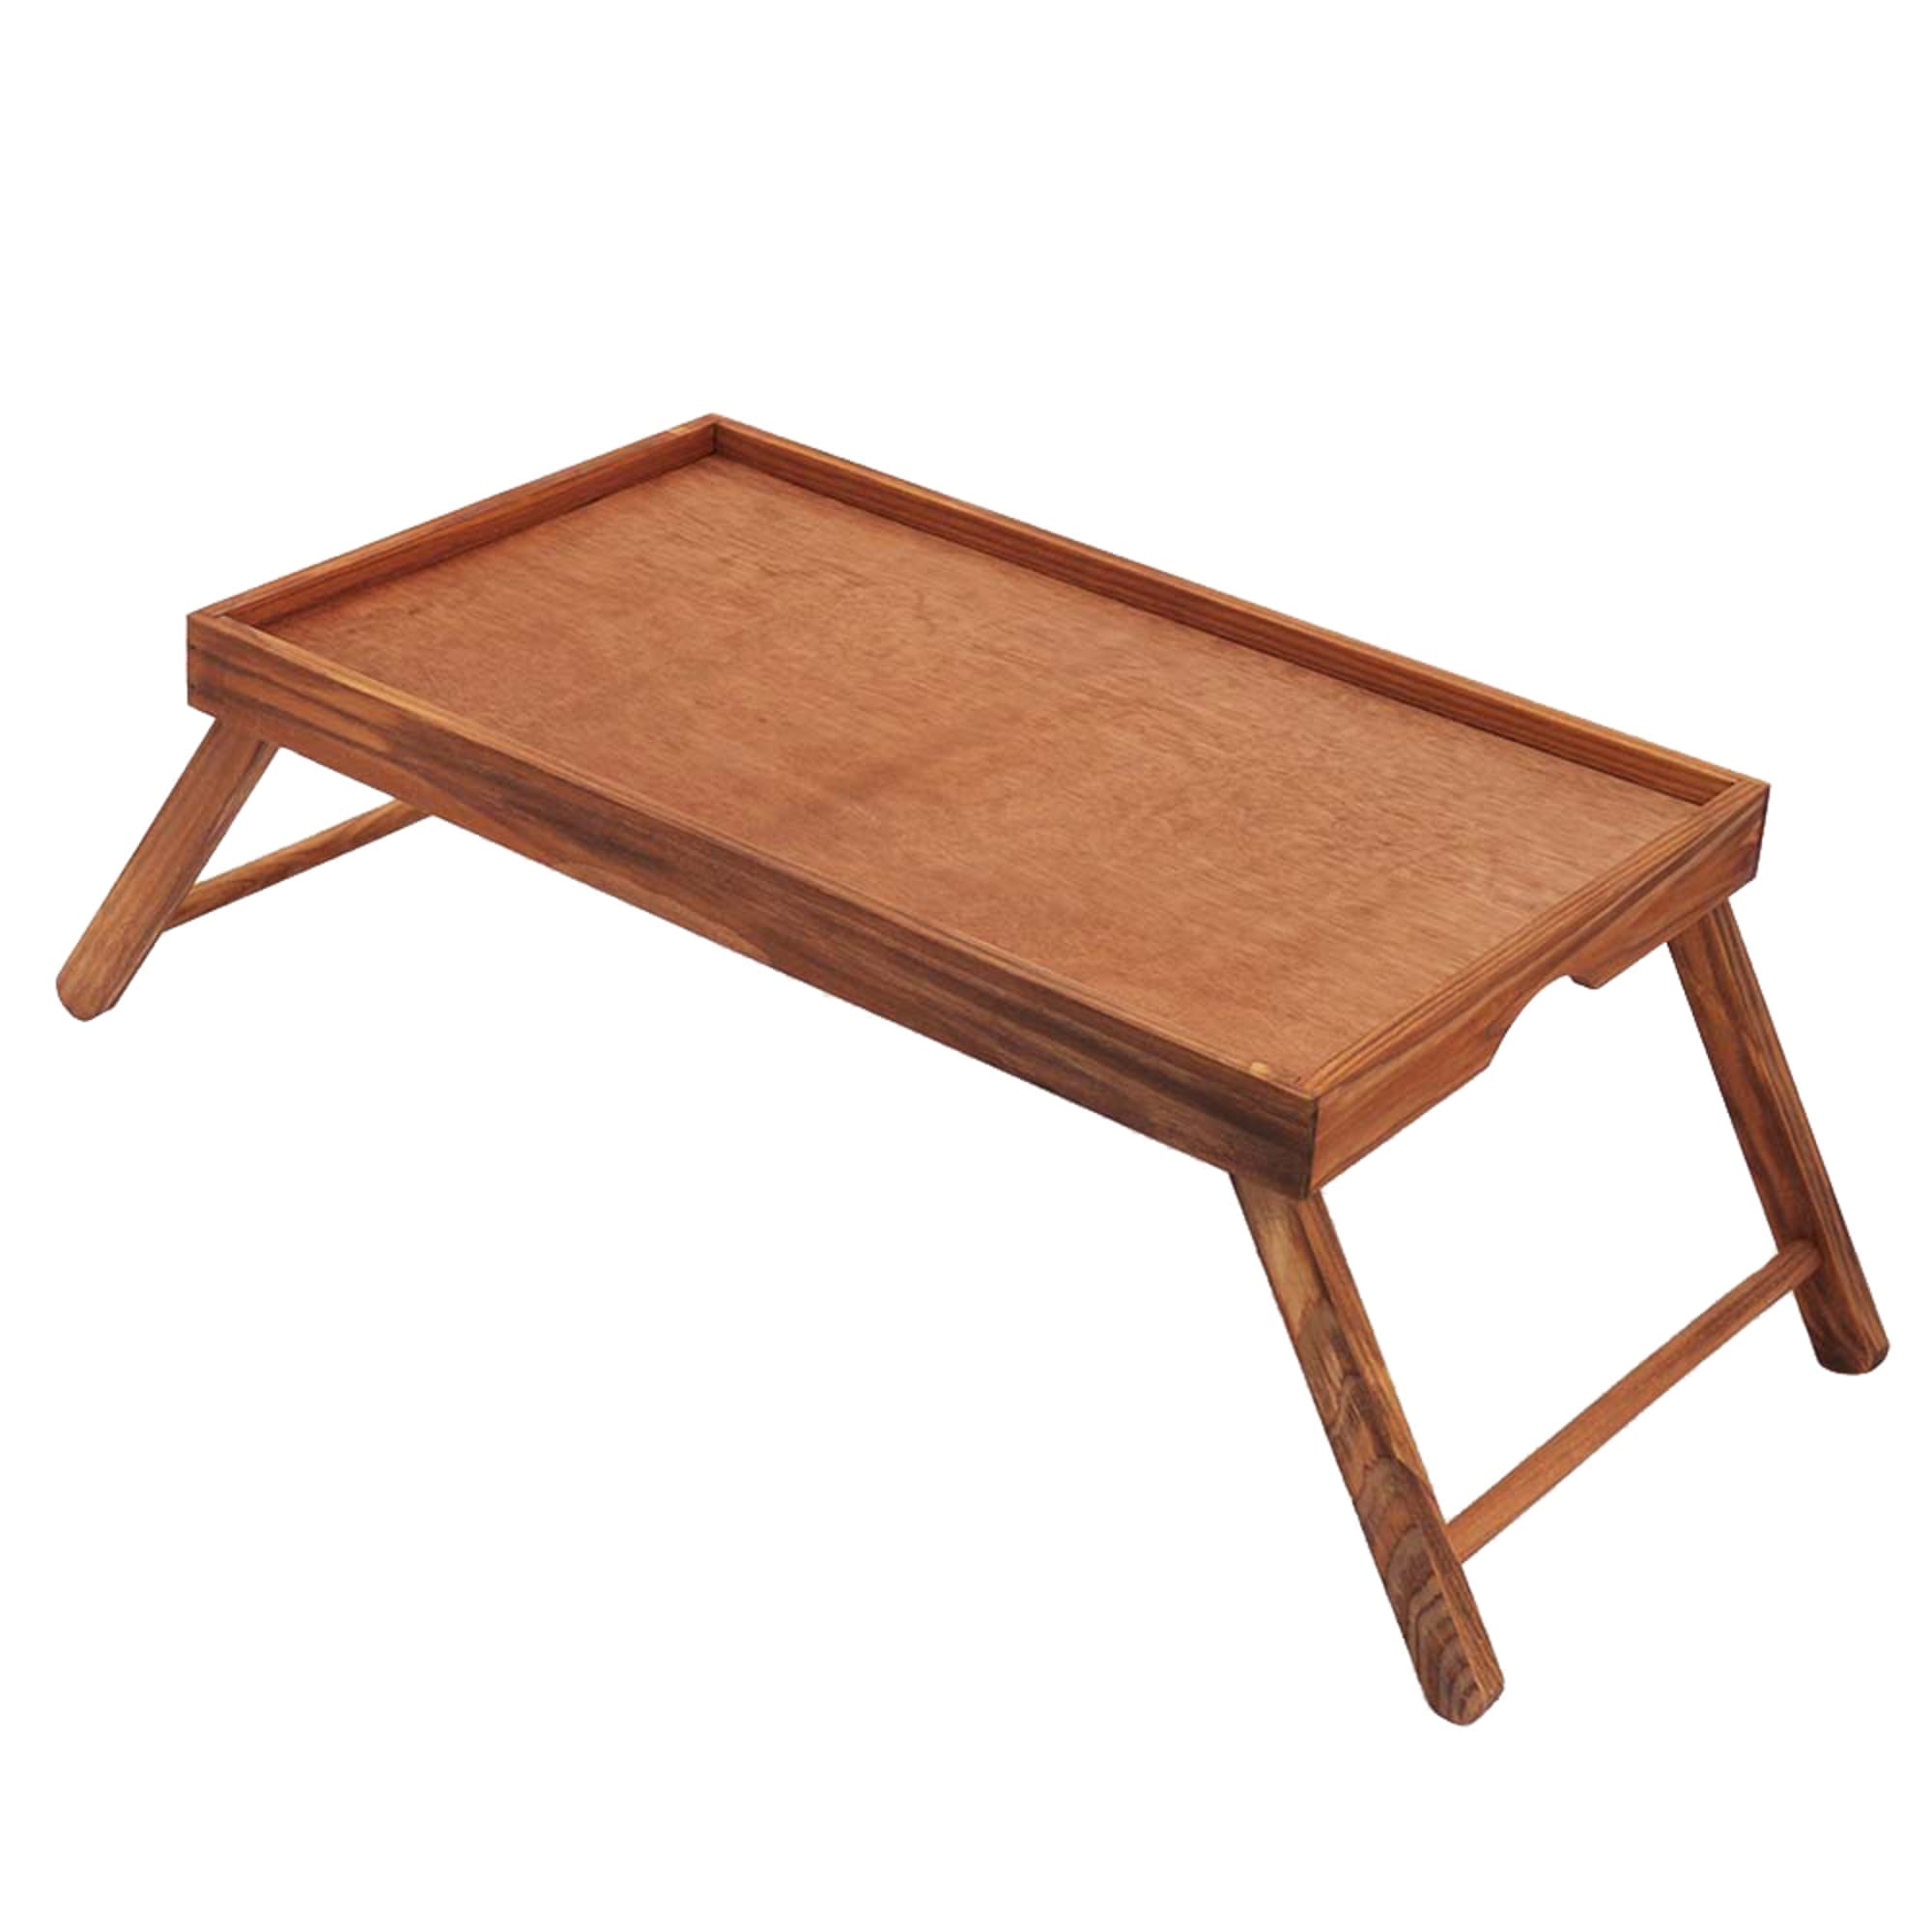 Home Basics Folding Multi-Purpose Rustic Bed Tray with Carved Handles, Pine $10.00 EACH, CASE PACK OF 6